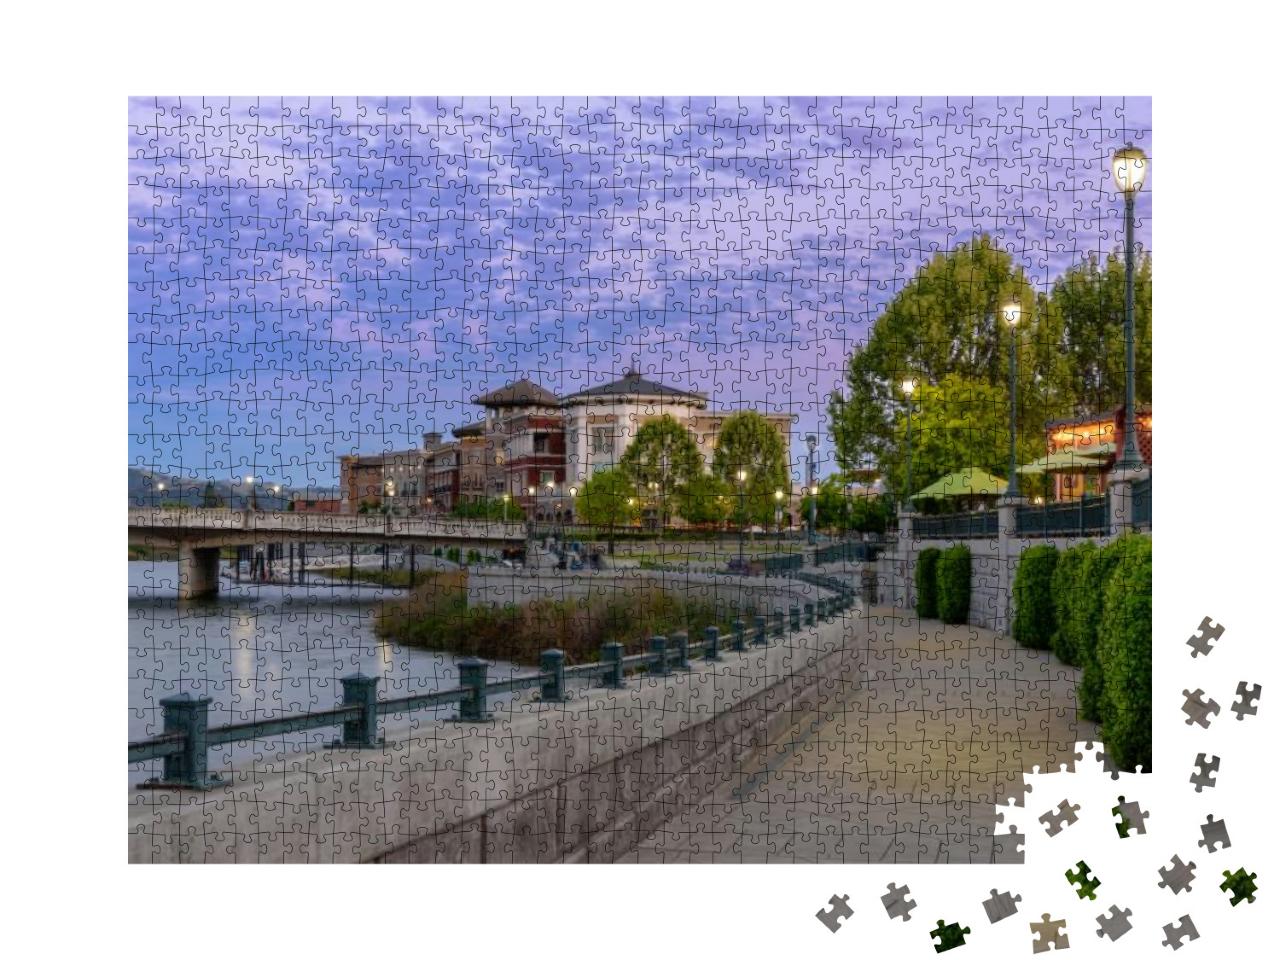 Evening Night Napa City Riverside Walkway... Jigsaw Puzzle with 1000 pieces